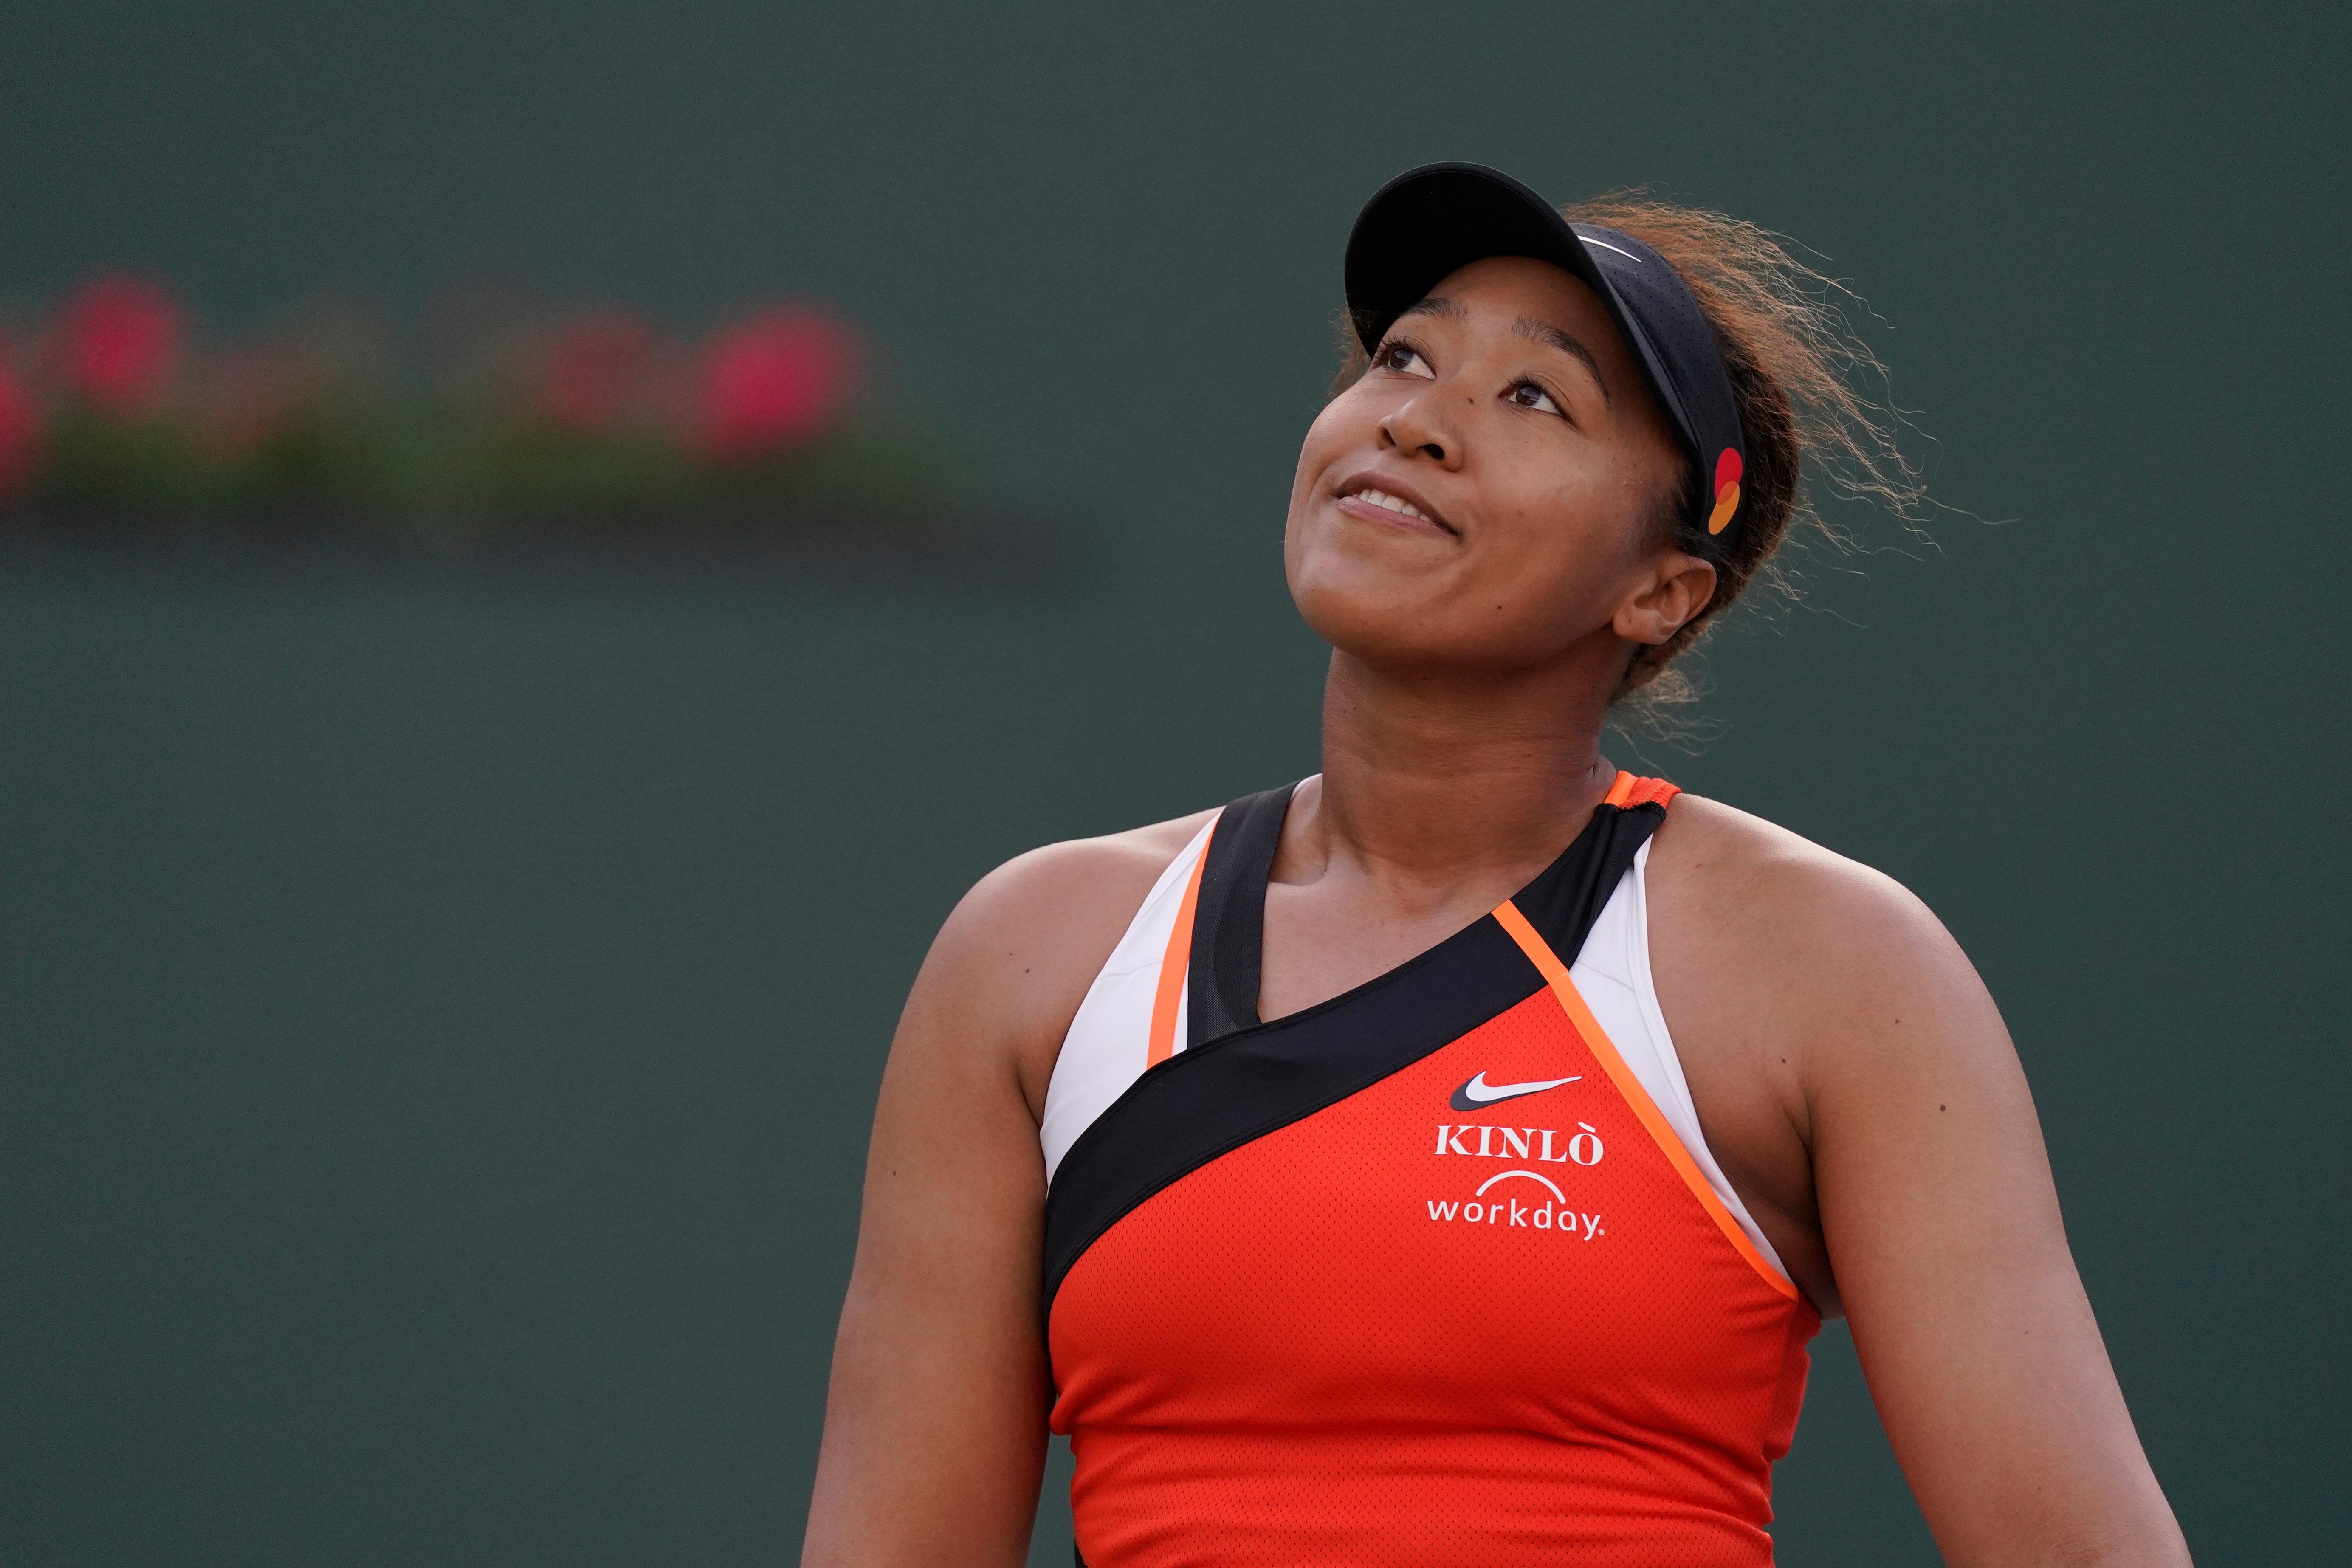 Naomi Osaka scored her first career win against Sloane Stephens in three tries with a three-set comeback in Round 1 of the BNP Paribas Open (Mark J. Terrill/AP)